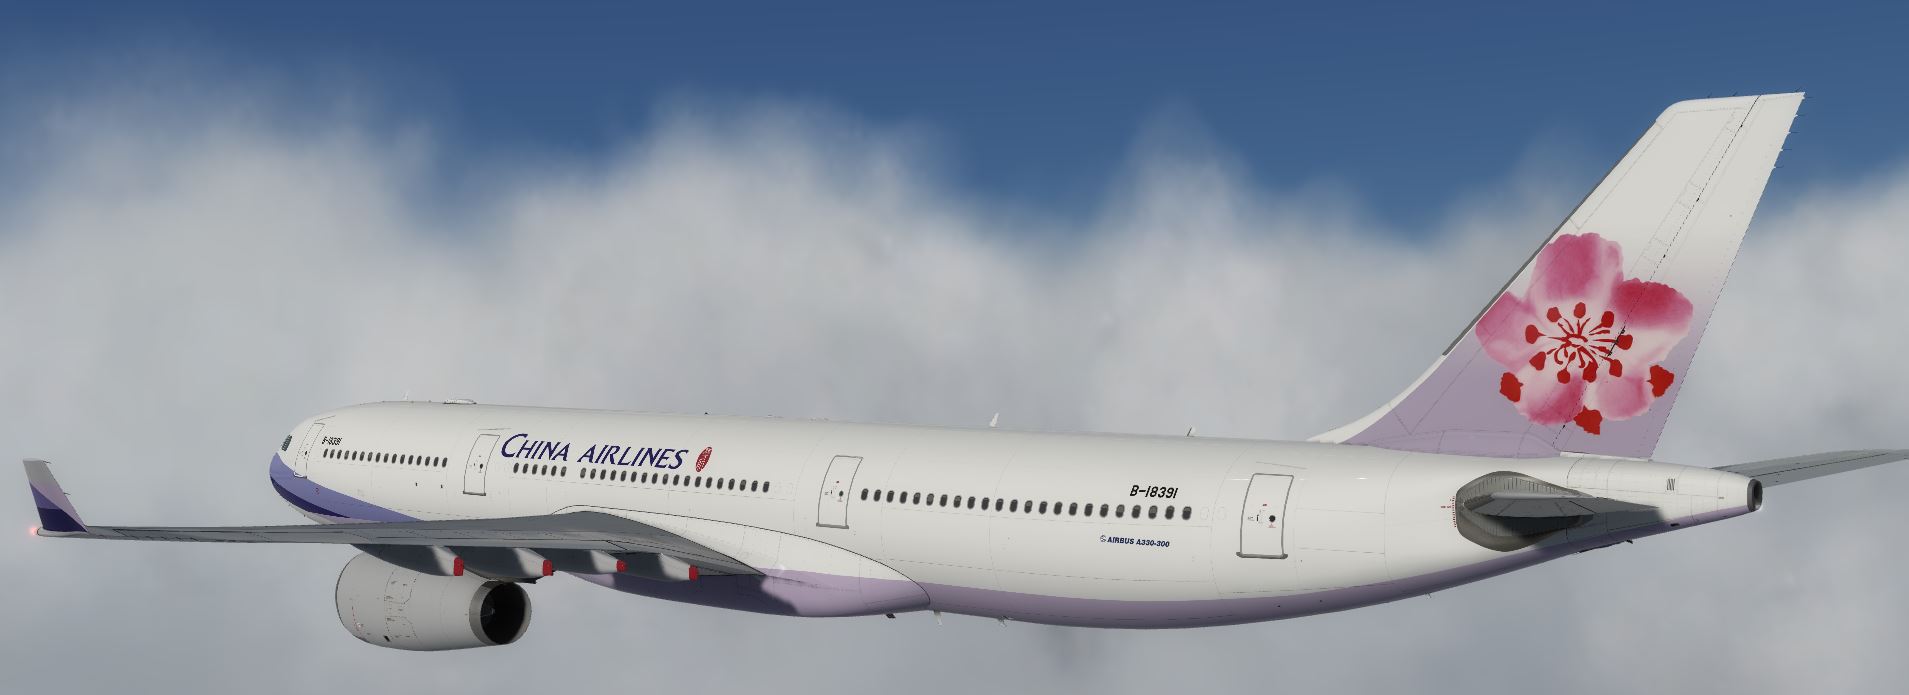 AS A330 ChinaAirline-2563 